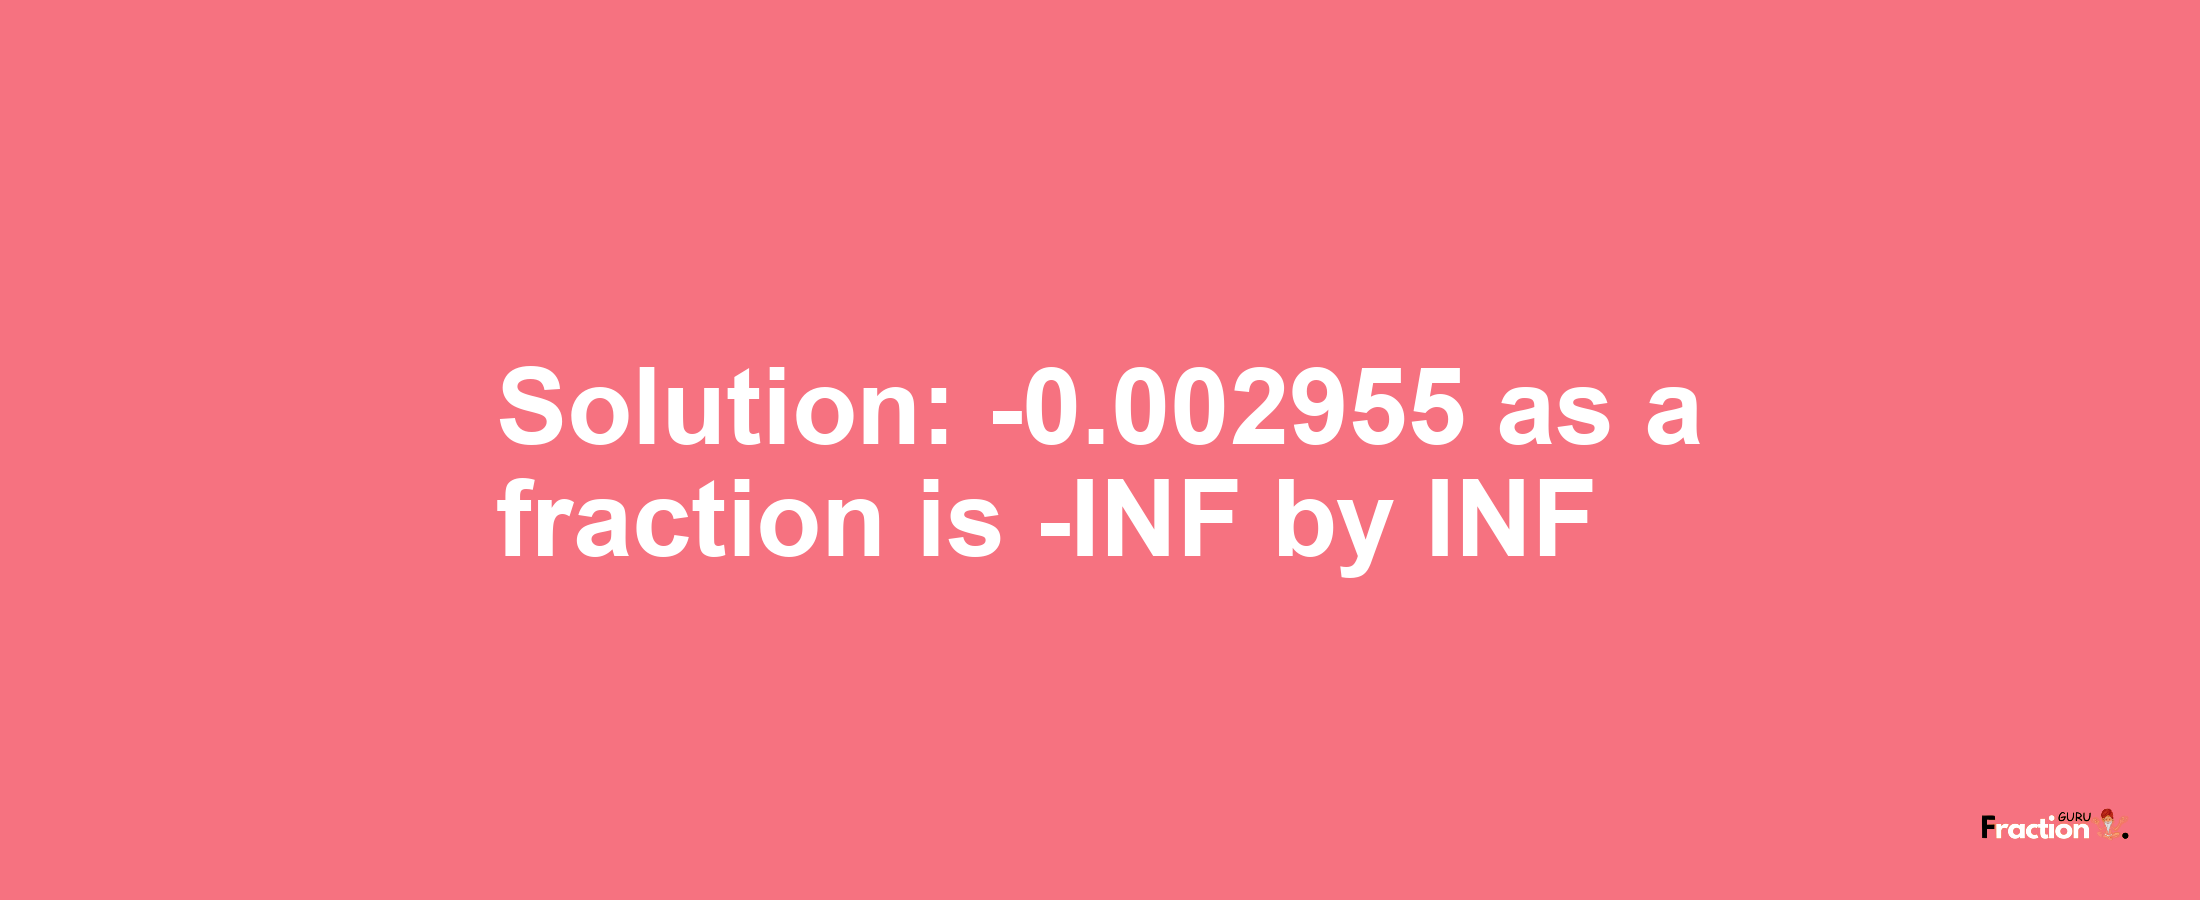 Solution:-0.002955 as a fraction is -INF/INF